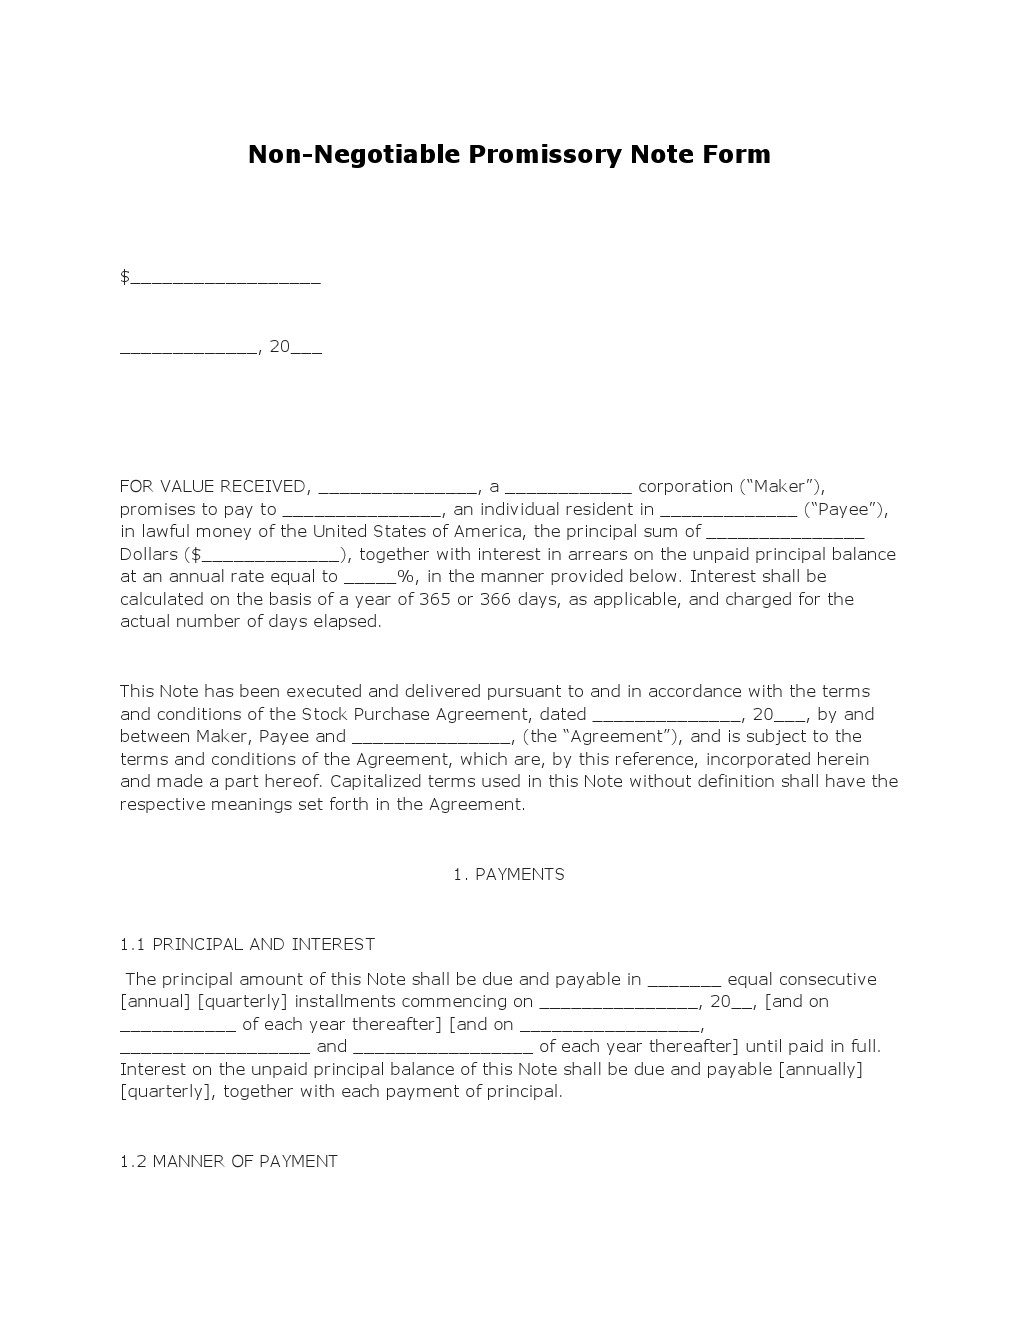 Non Negotiable Promissory Note Form